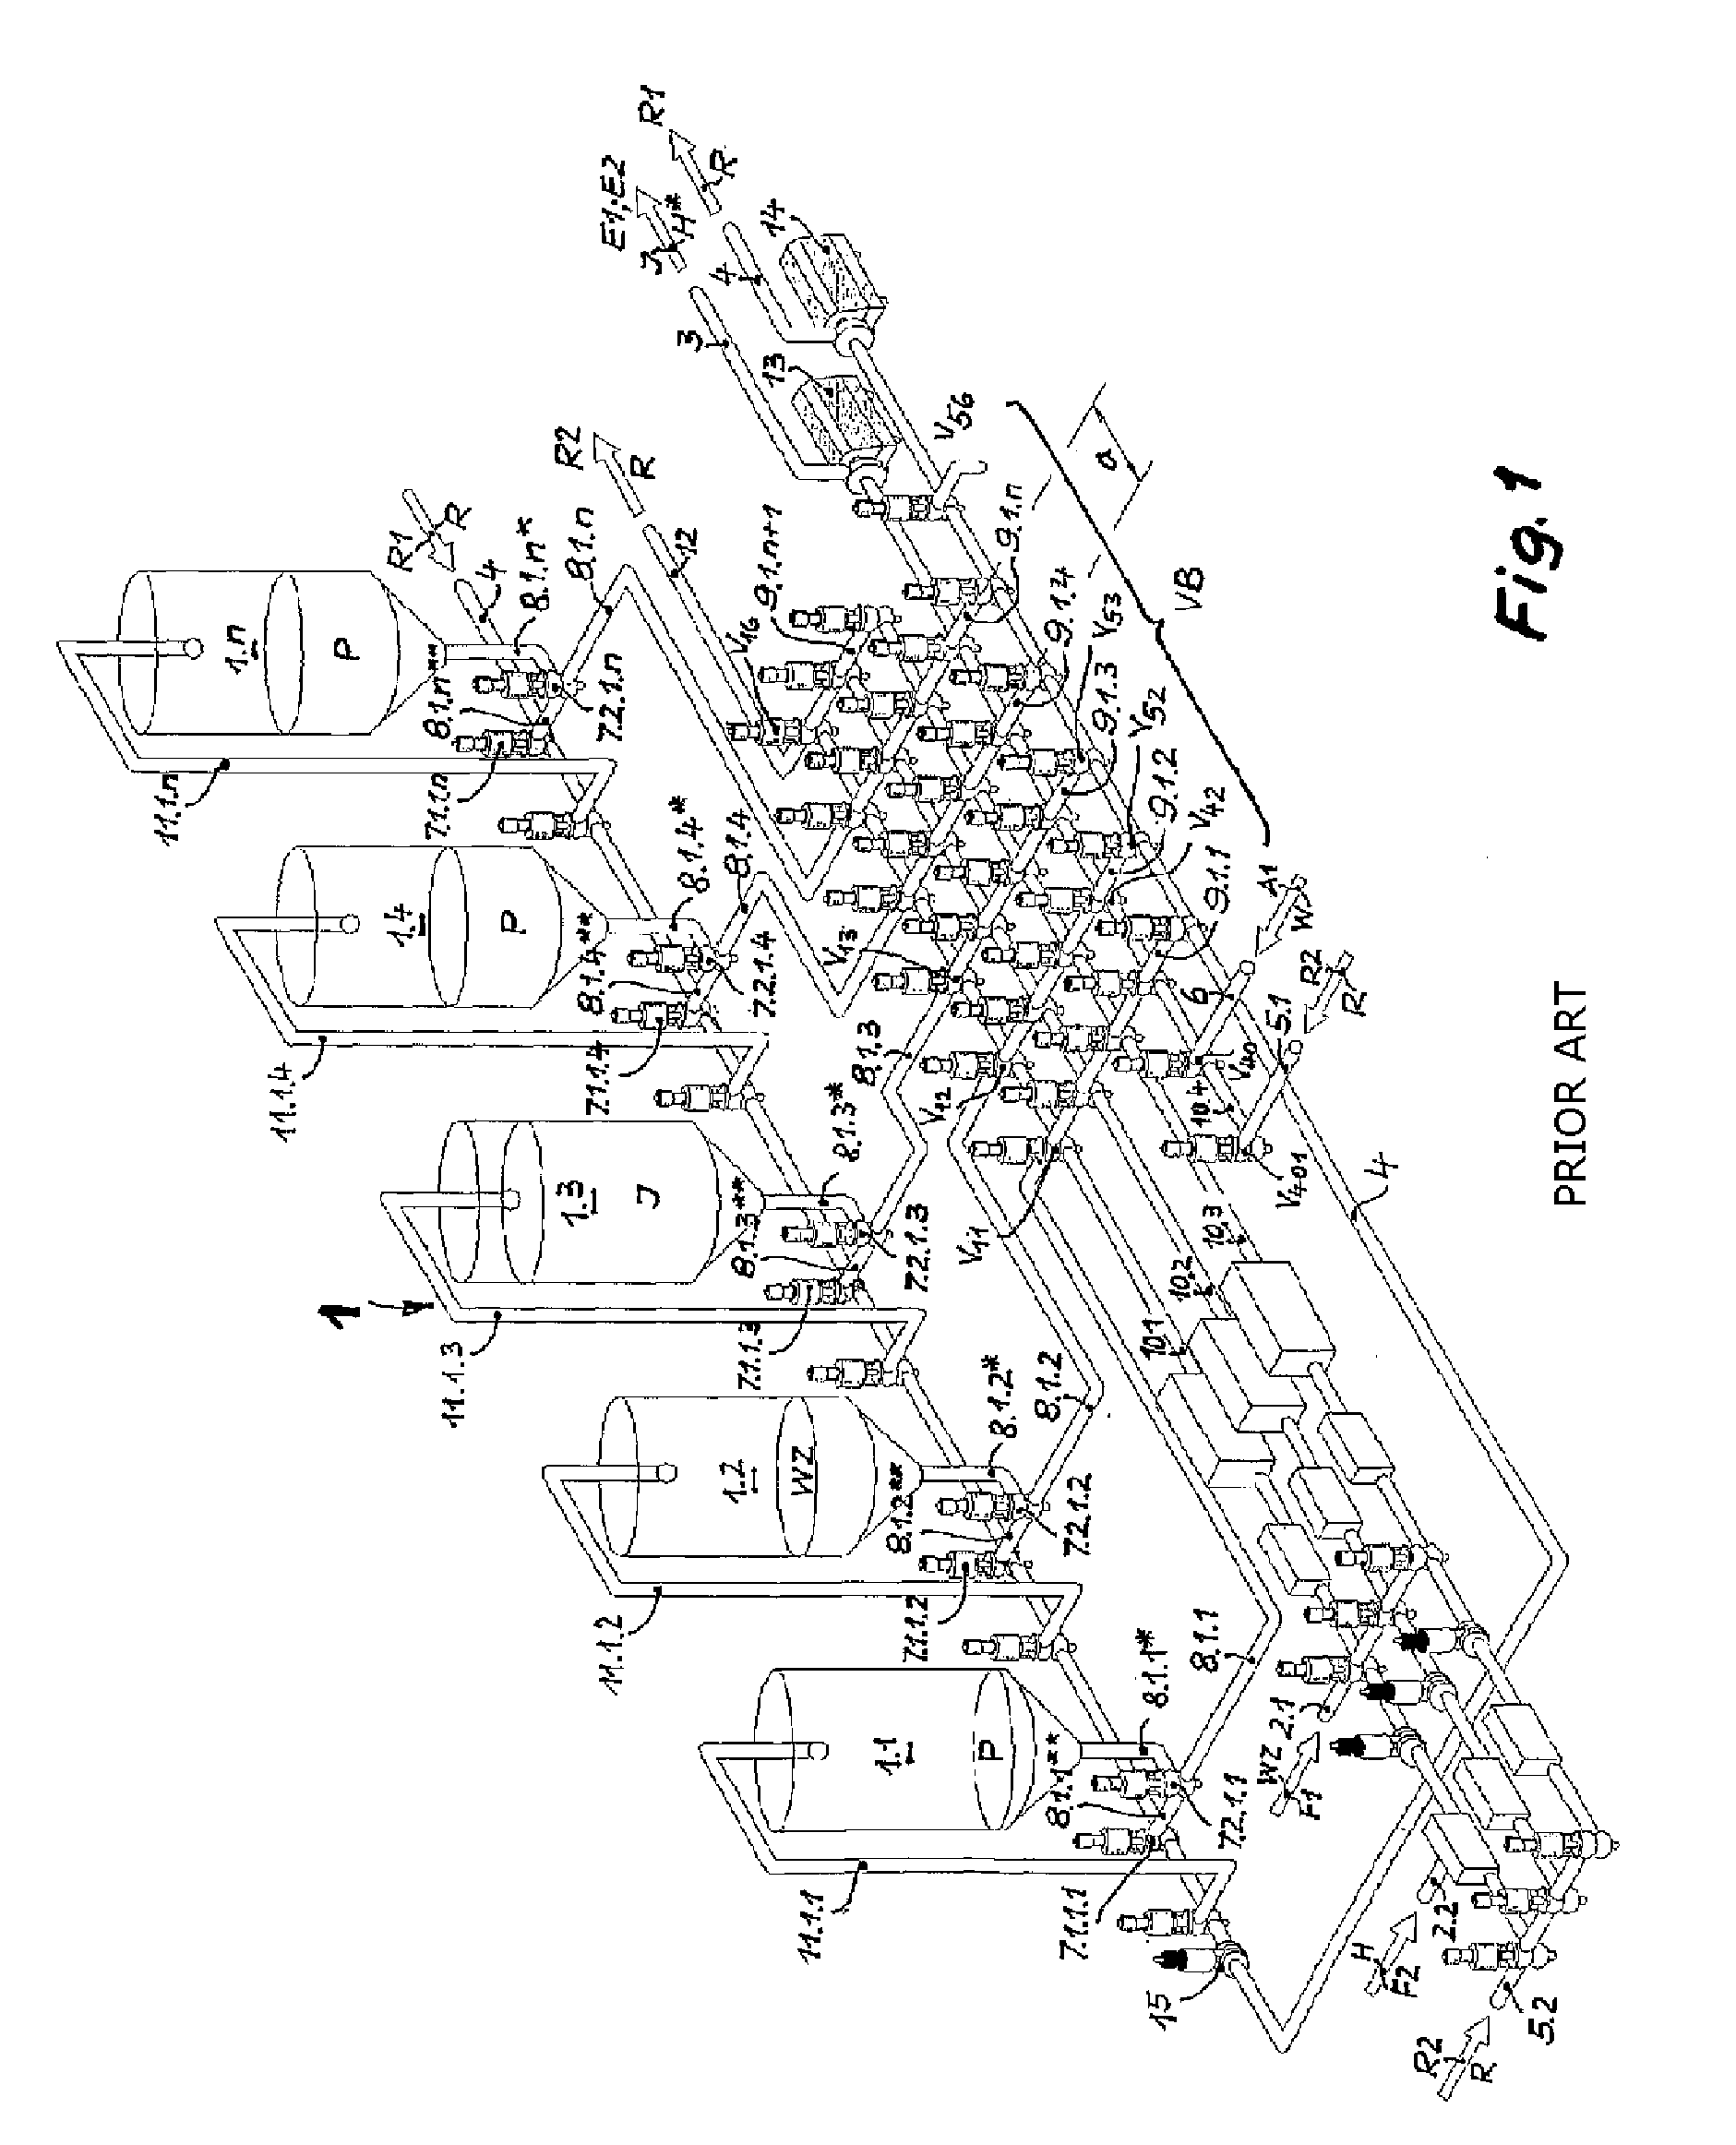 Method and device for operating tank farm systems which are interconnected with pipes in a fixed manner and which have pipe systems for liquids